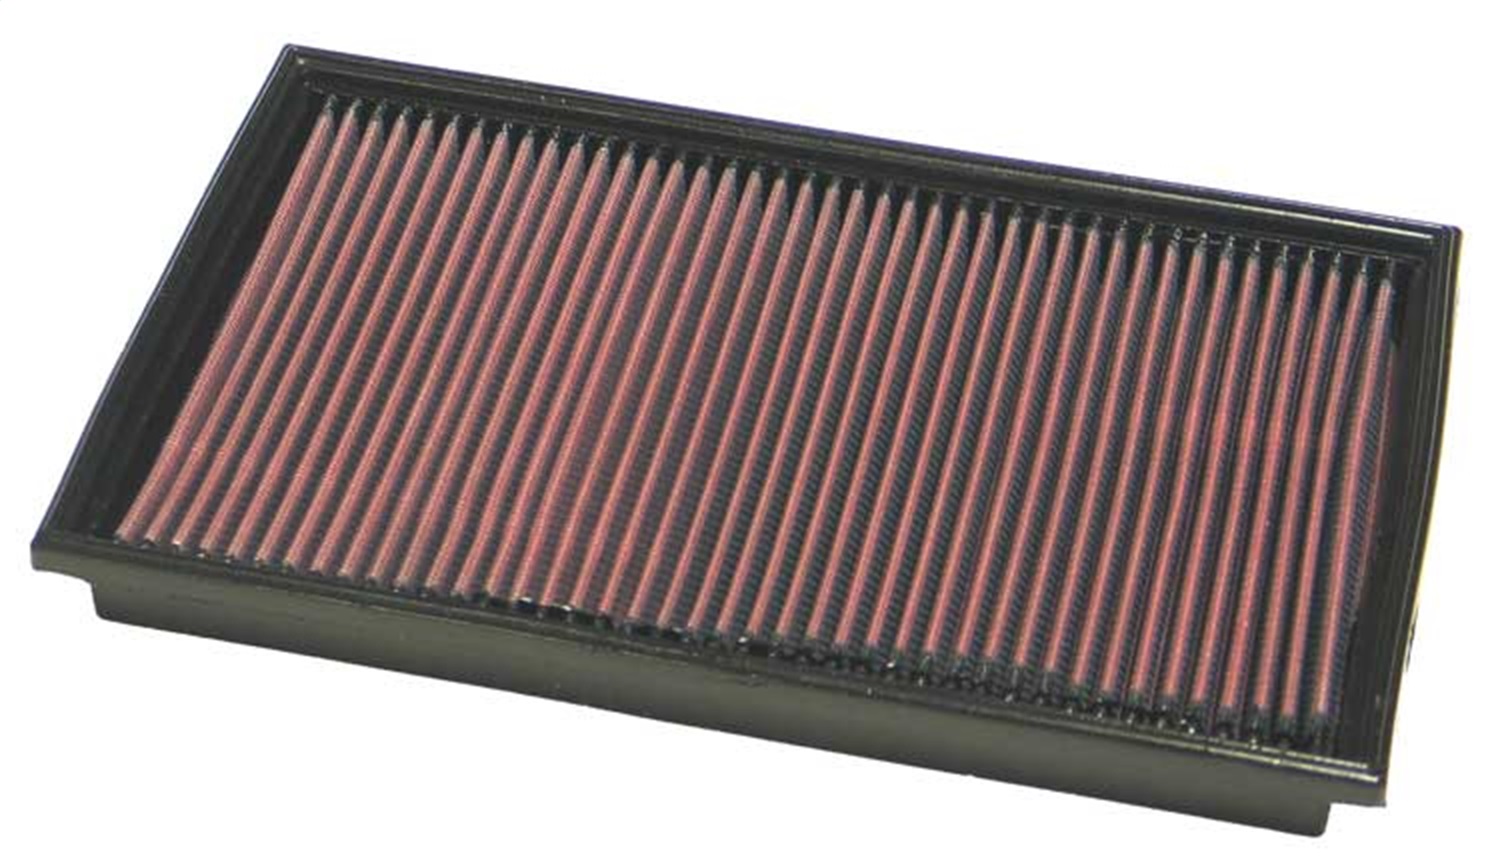 K&N Filters K&N Filters 33-2184 Air Filter Fits 00-03 E320 E430